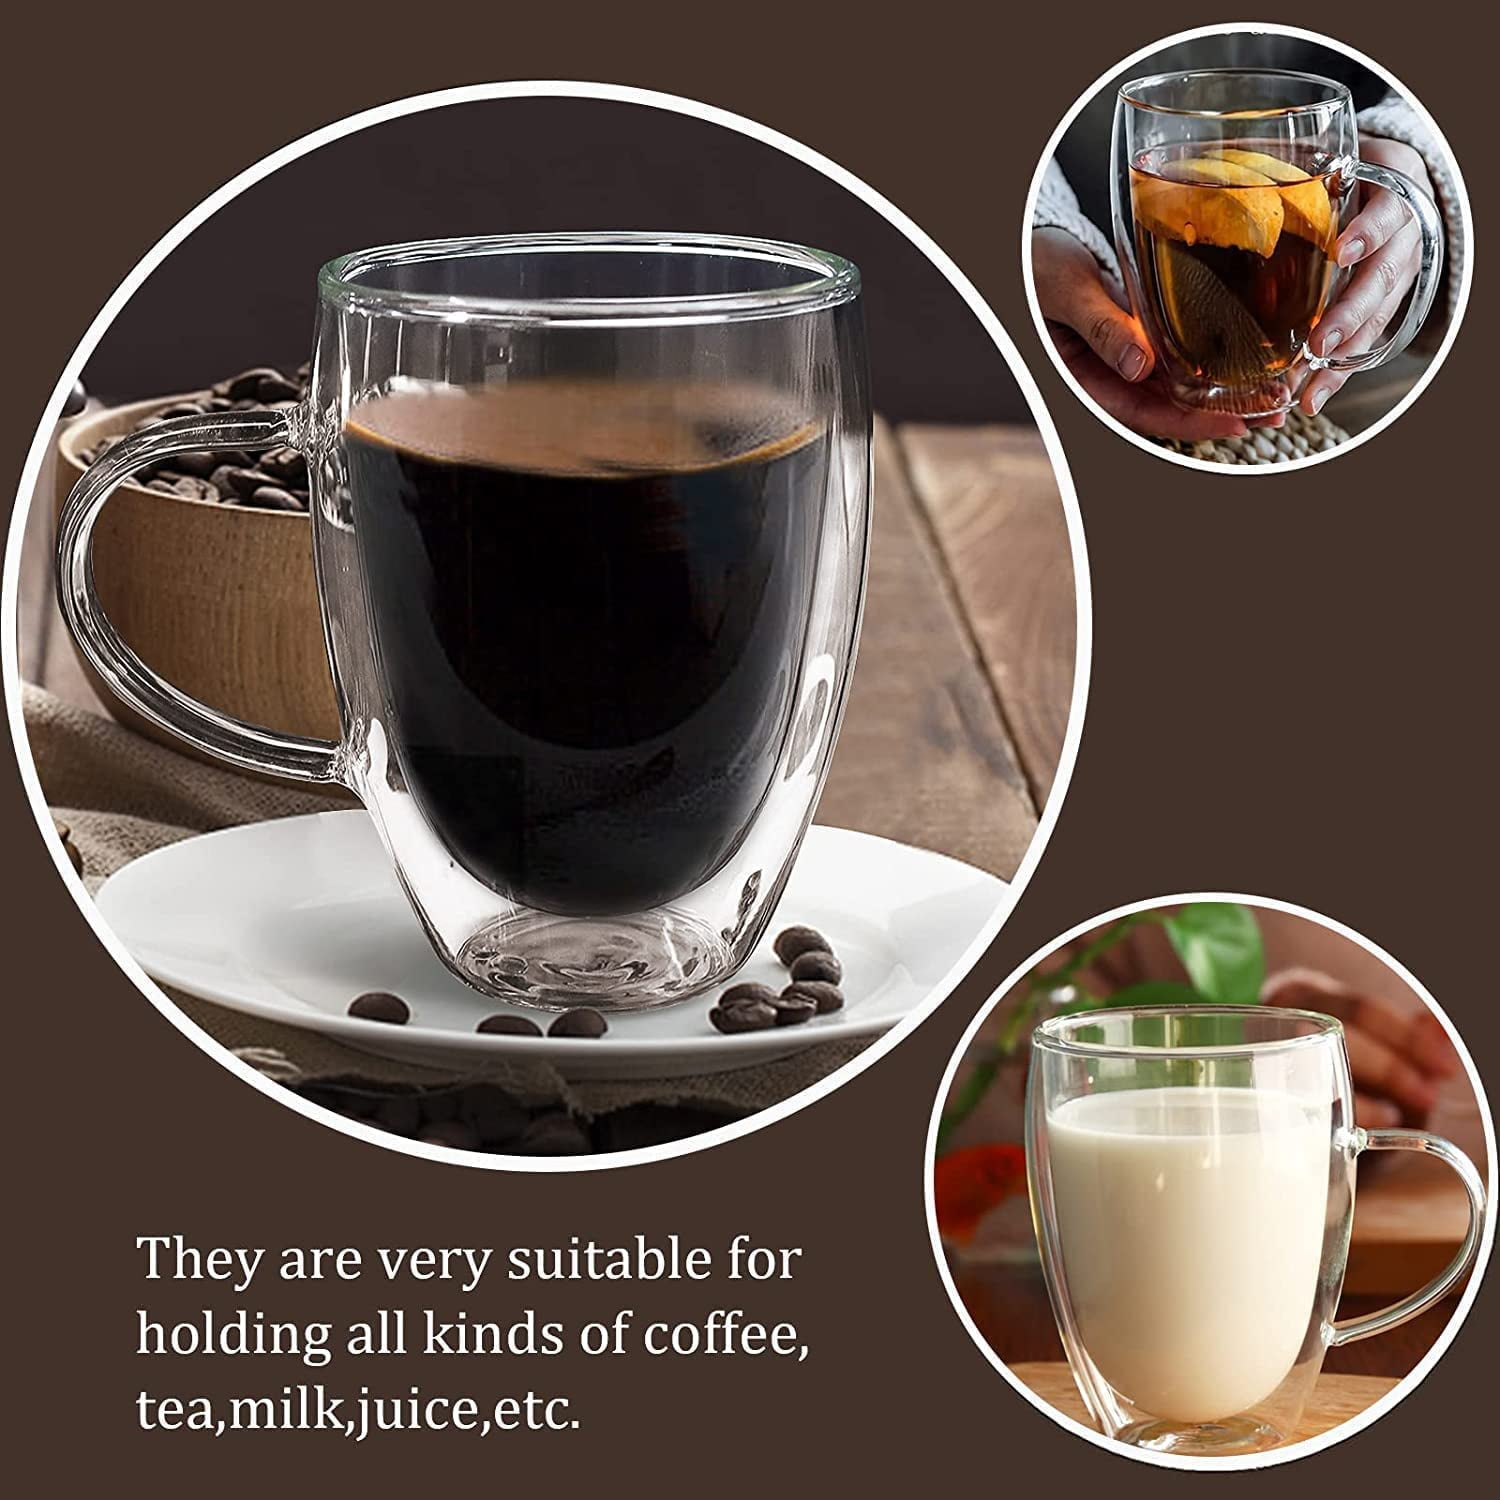 2-Pack 15 Oz Double Walled Glass Coffee Mugs with Handle,Large  Insulated Layer Coffee Cups,Clear Borosilicate Mugs,Perfect for  Cappuccino,Tea,Latte,Espresso,Hot Beverage,Wine,Microwave Safe: Espresso  Cups